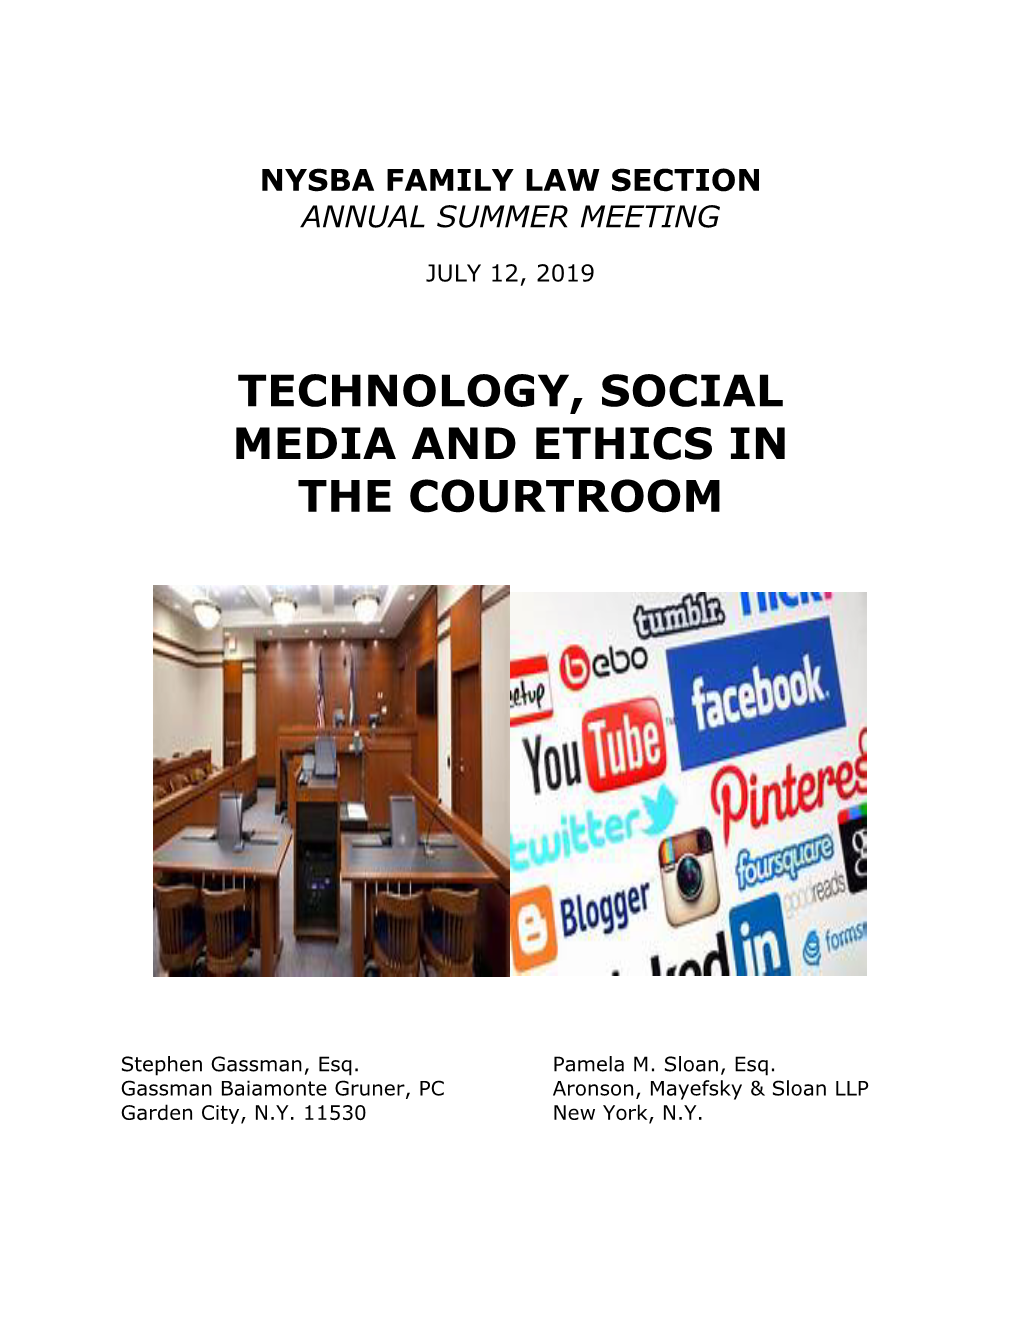 Technology, Social Media and Ethics in the Courtroom